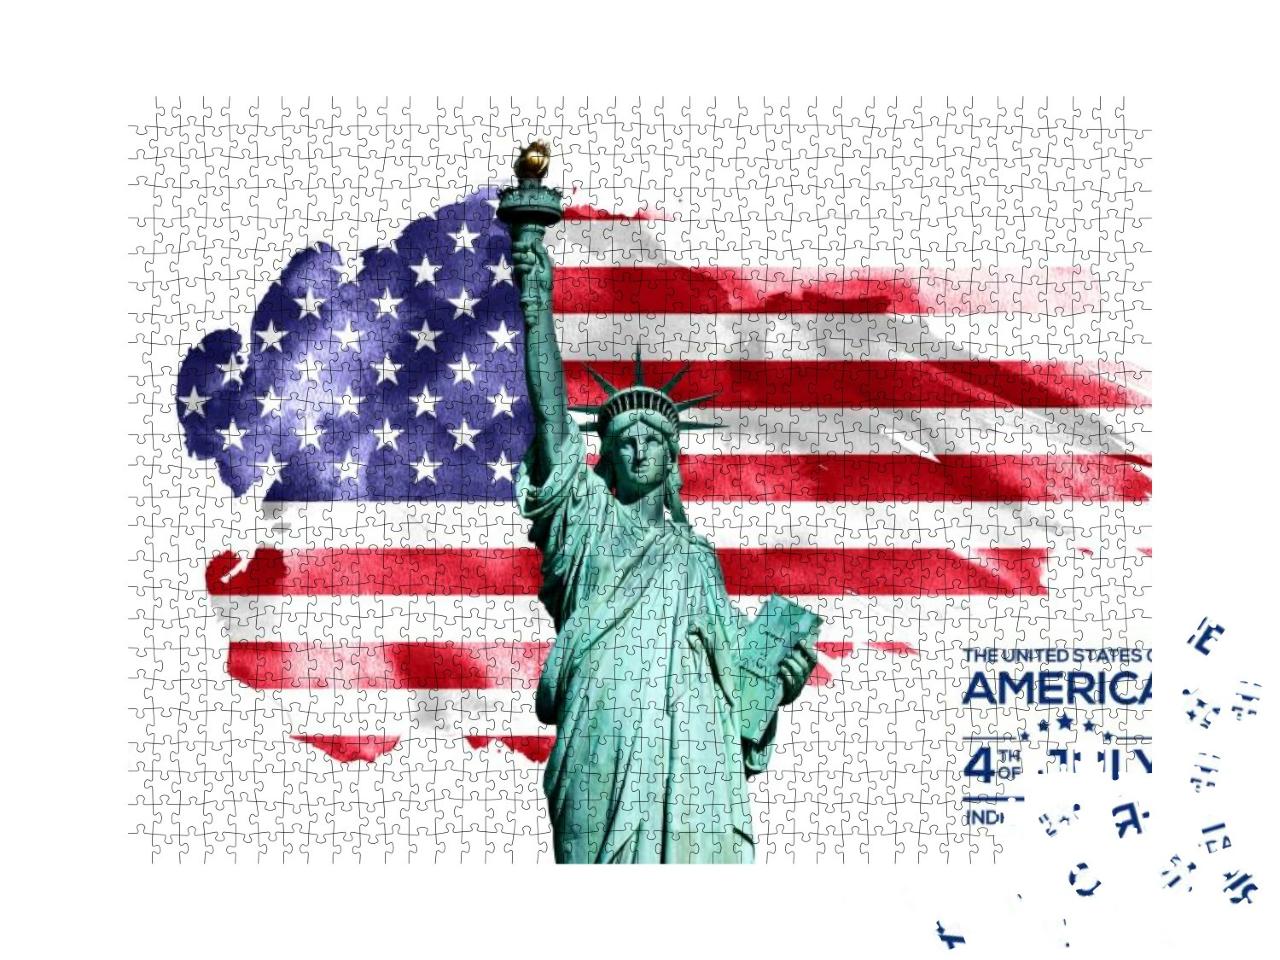 4th of July, Happy Independence Day Poster 3D Illustratio... Jigsaw Puzzle with 1000 pieces